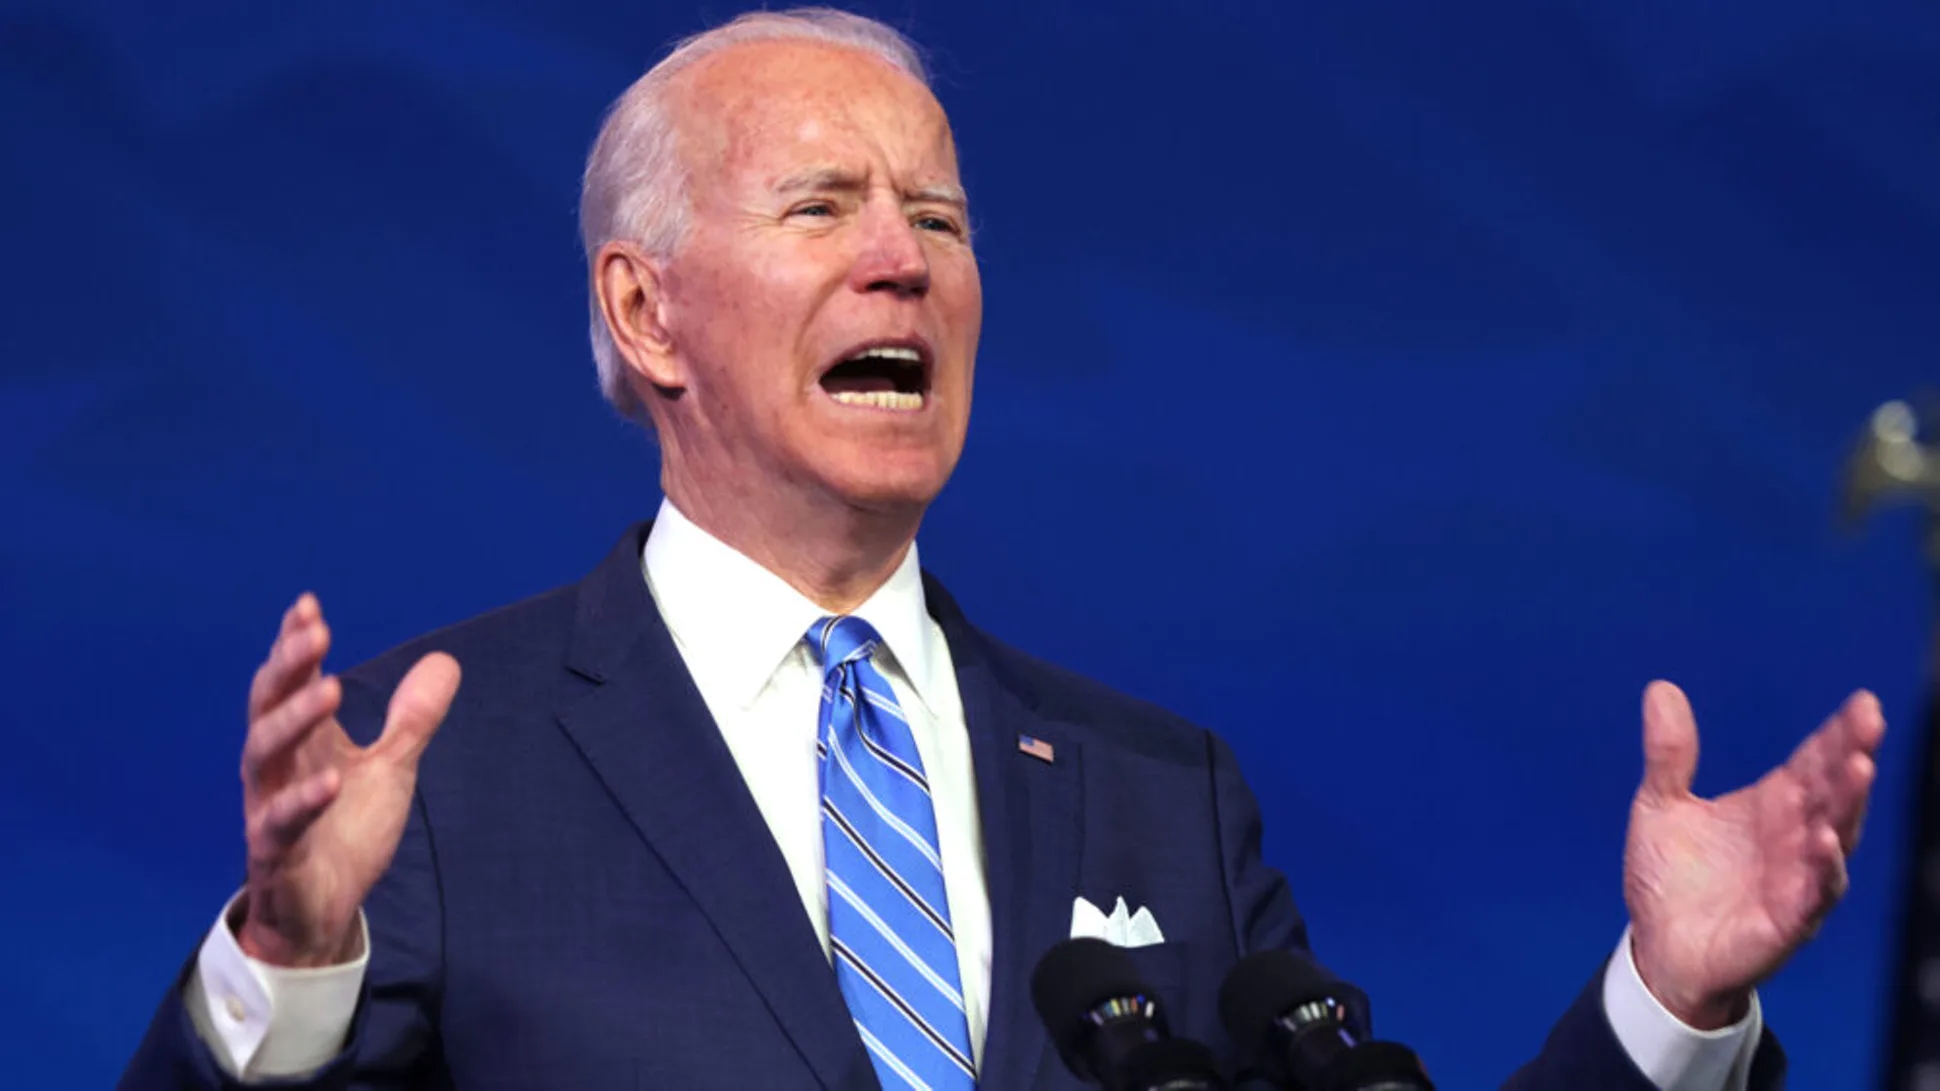 Biden Gets Slammed For Pushing Nuclear Deal With Dishonest Iran